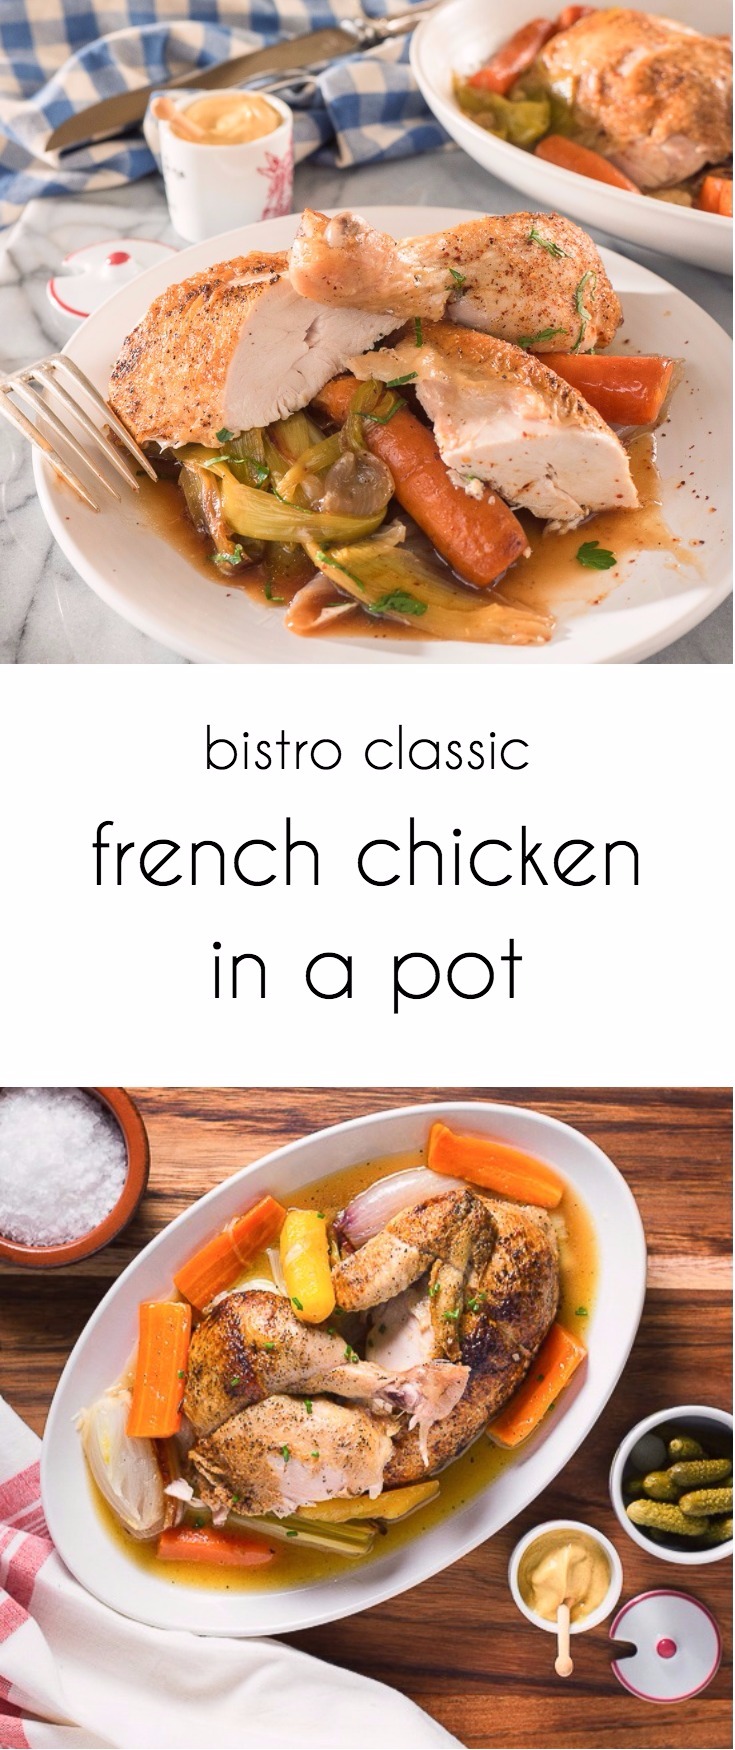 French chicken in a pot is a classic way of cooking a truly remarkable bird.